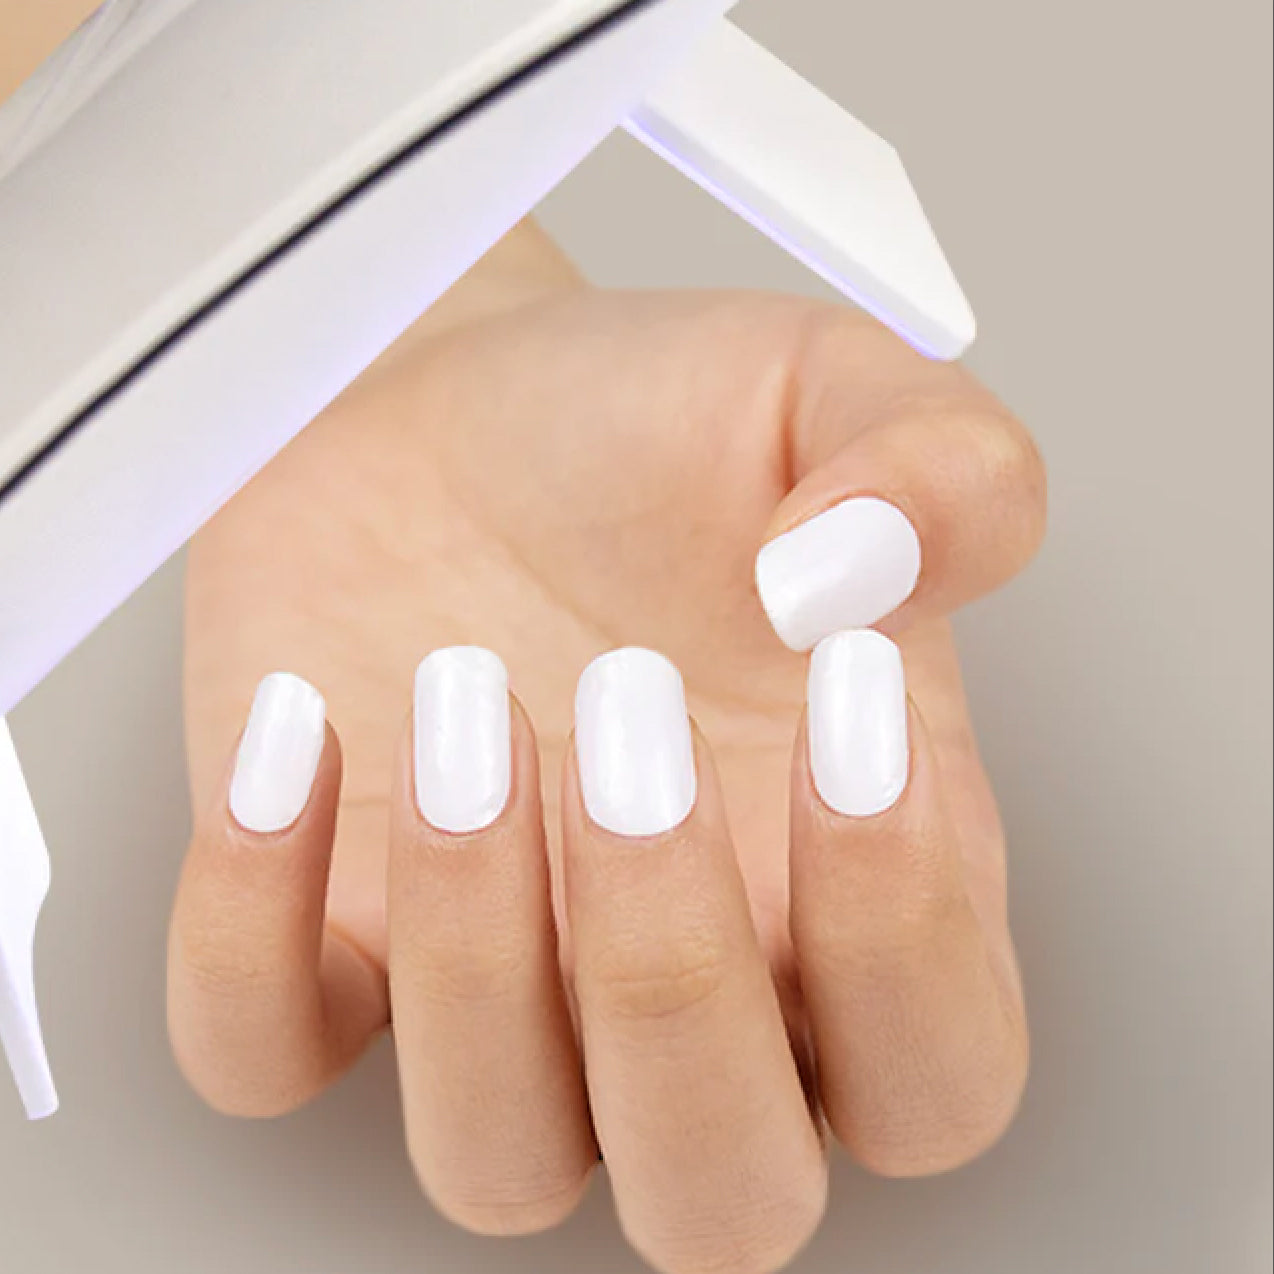 SOLID WHITE - SEMI-CURED GEL NAIL STICKERS 20 STRIPS